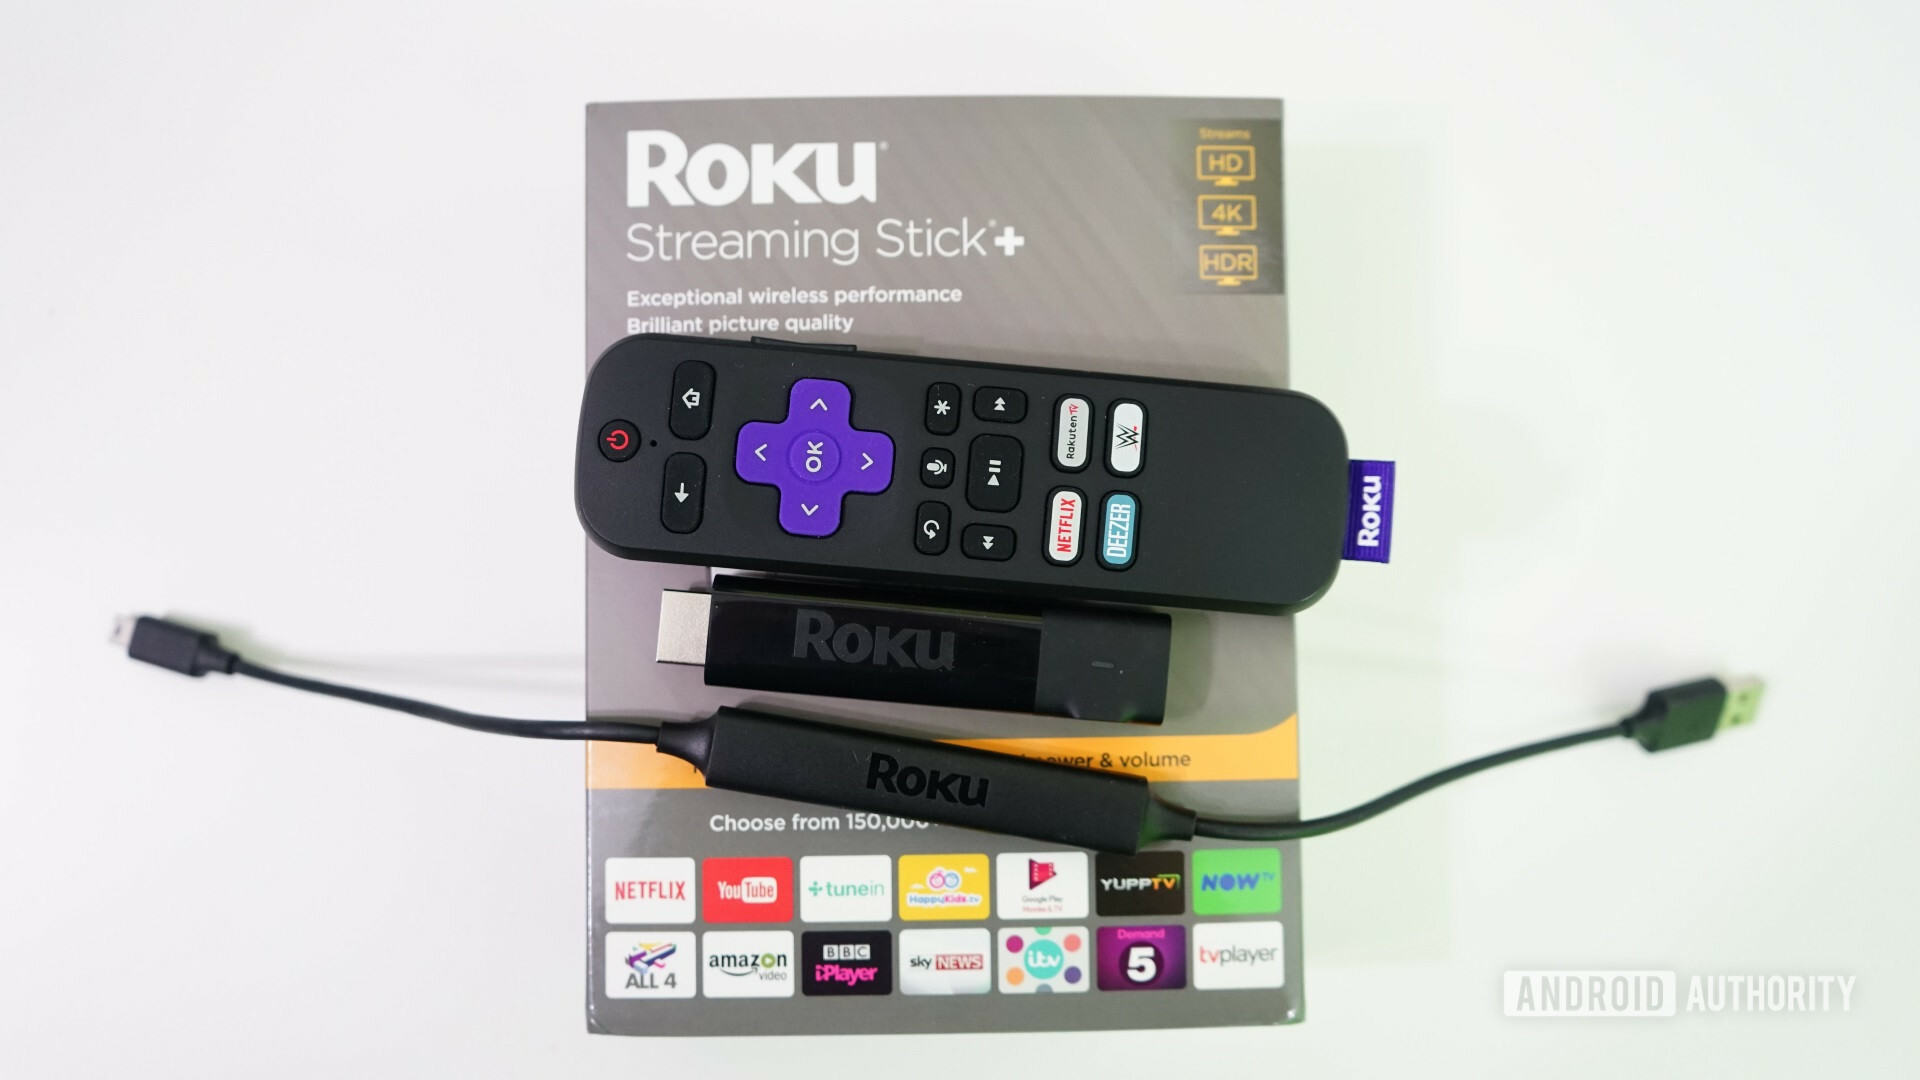 Top view of the content of the box of Roku Streaming Stick Plus.